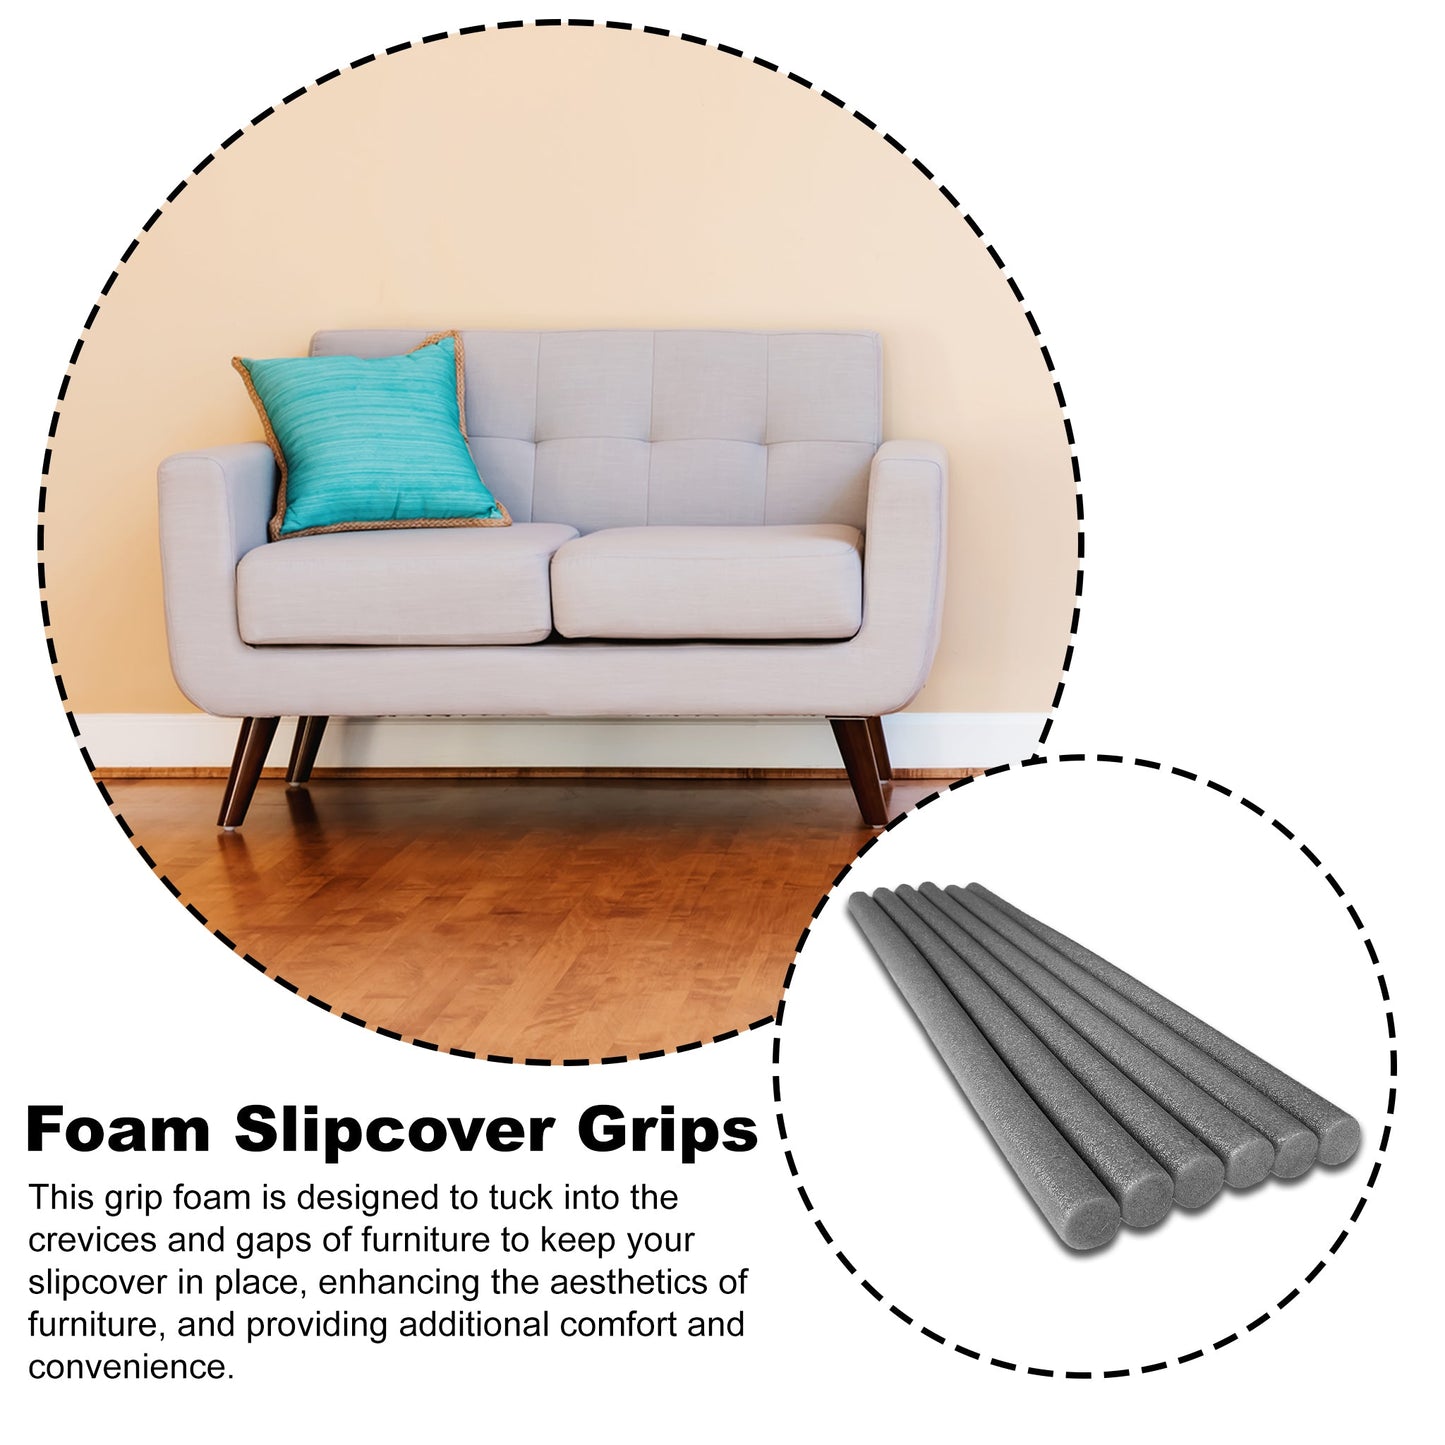 17ft Sofa Slipcover Tuck Grip Foam Rods Non Slip Foam Couch Cushion Cover Grip for Furniture